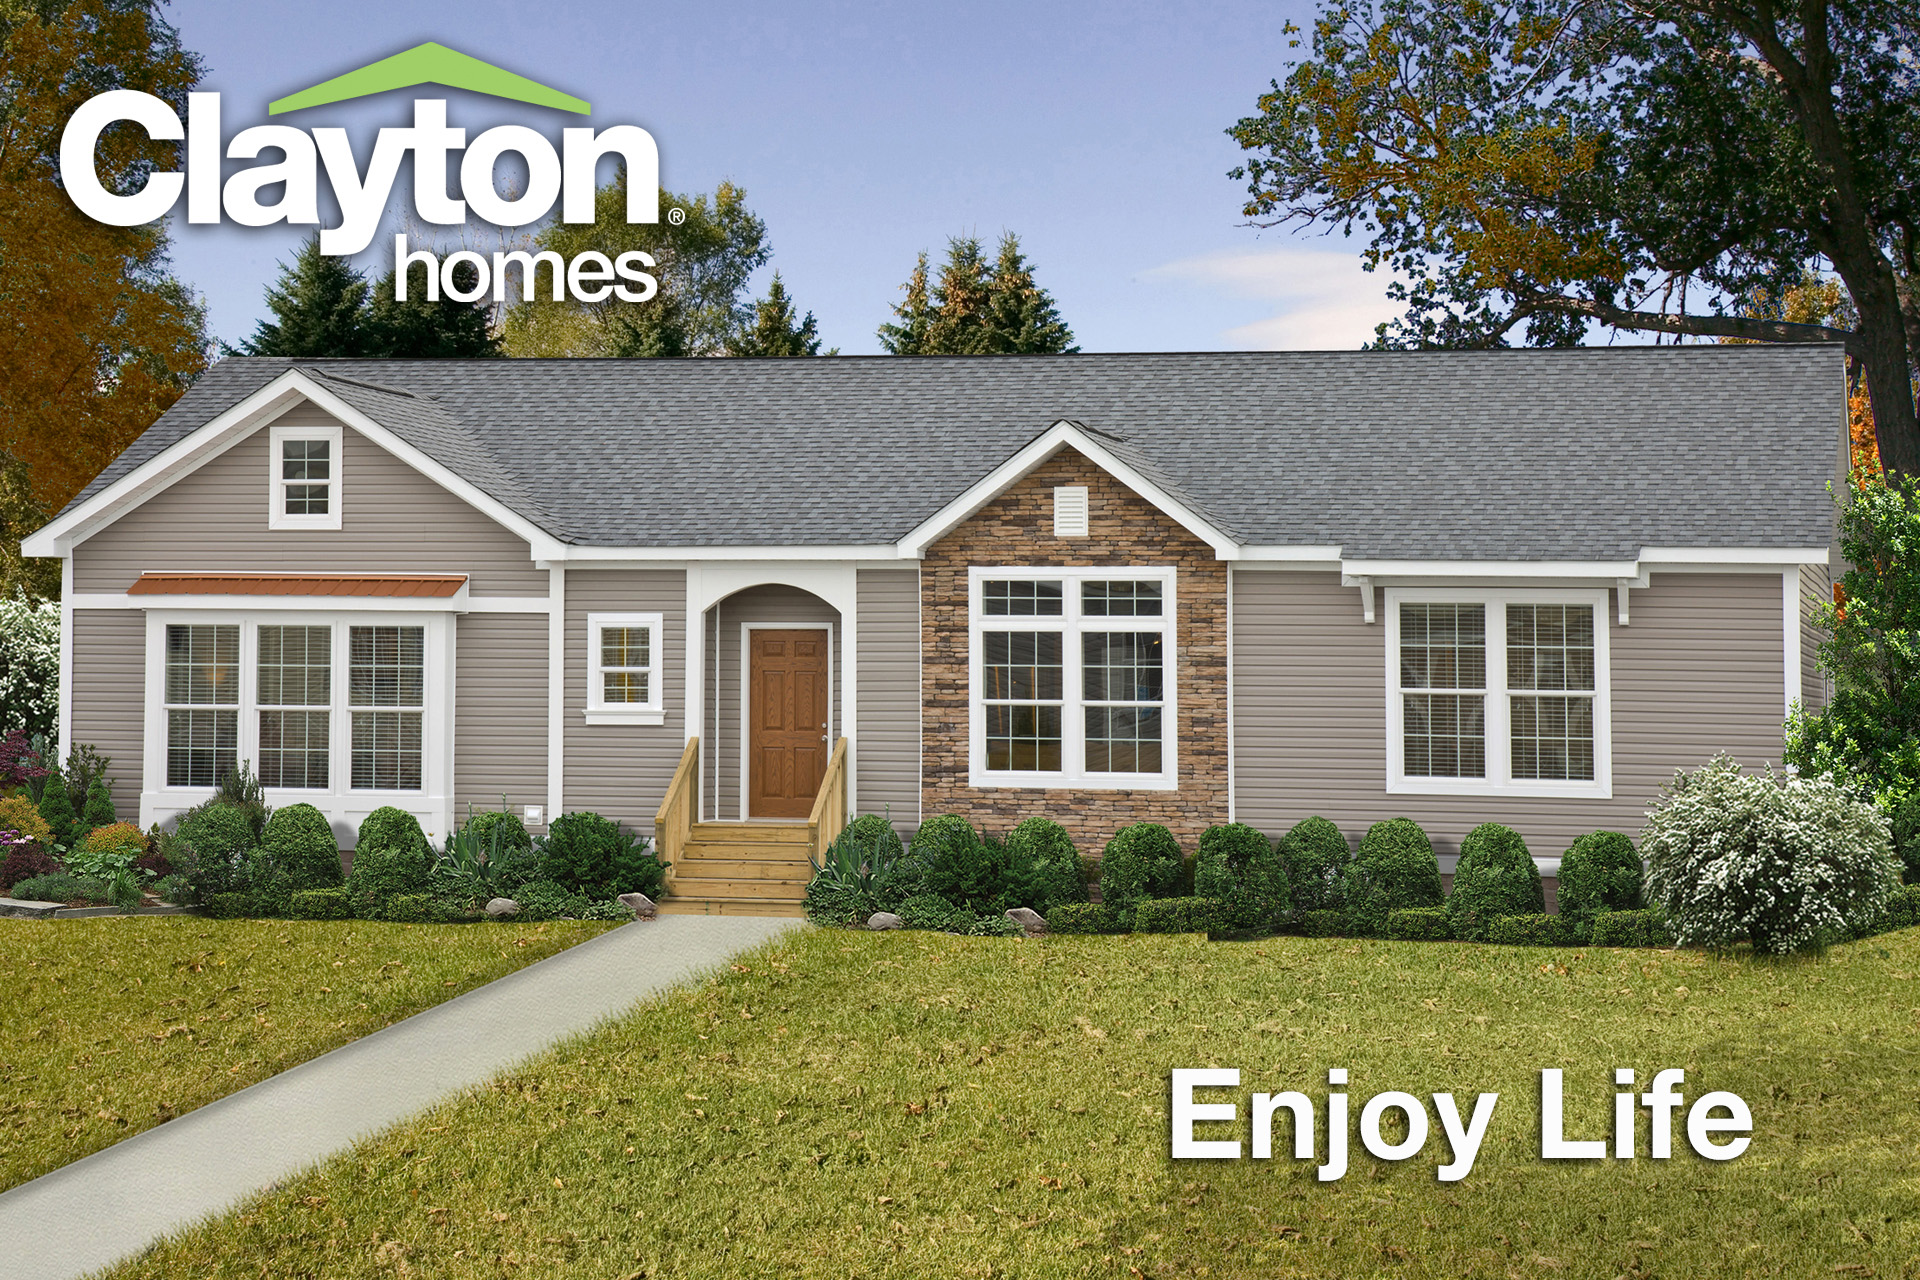 Clayton Homes has been helping people enjoy life since 1956.